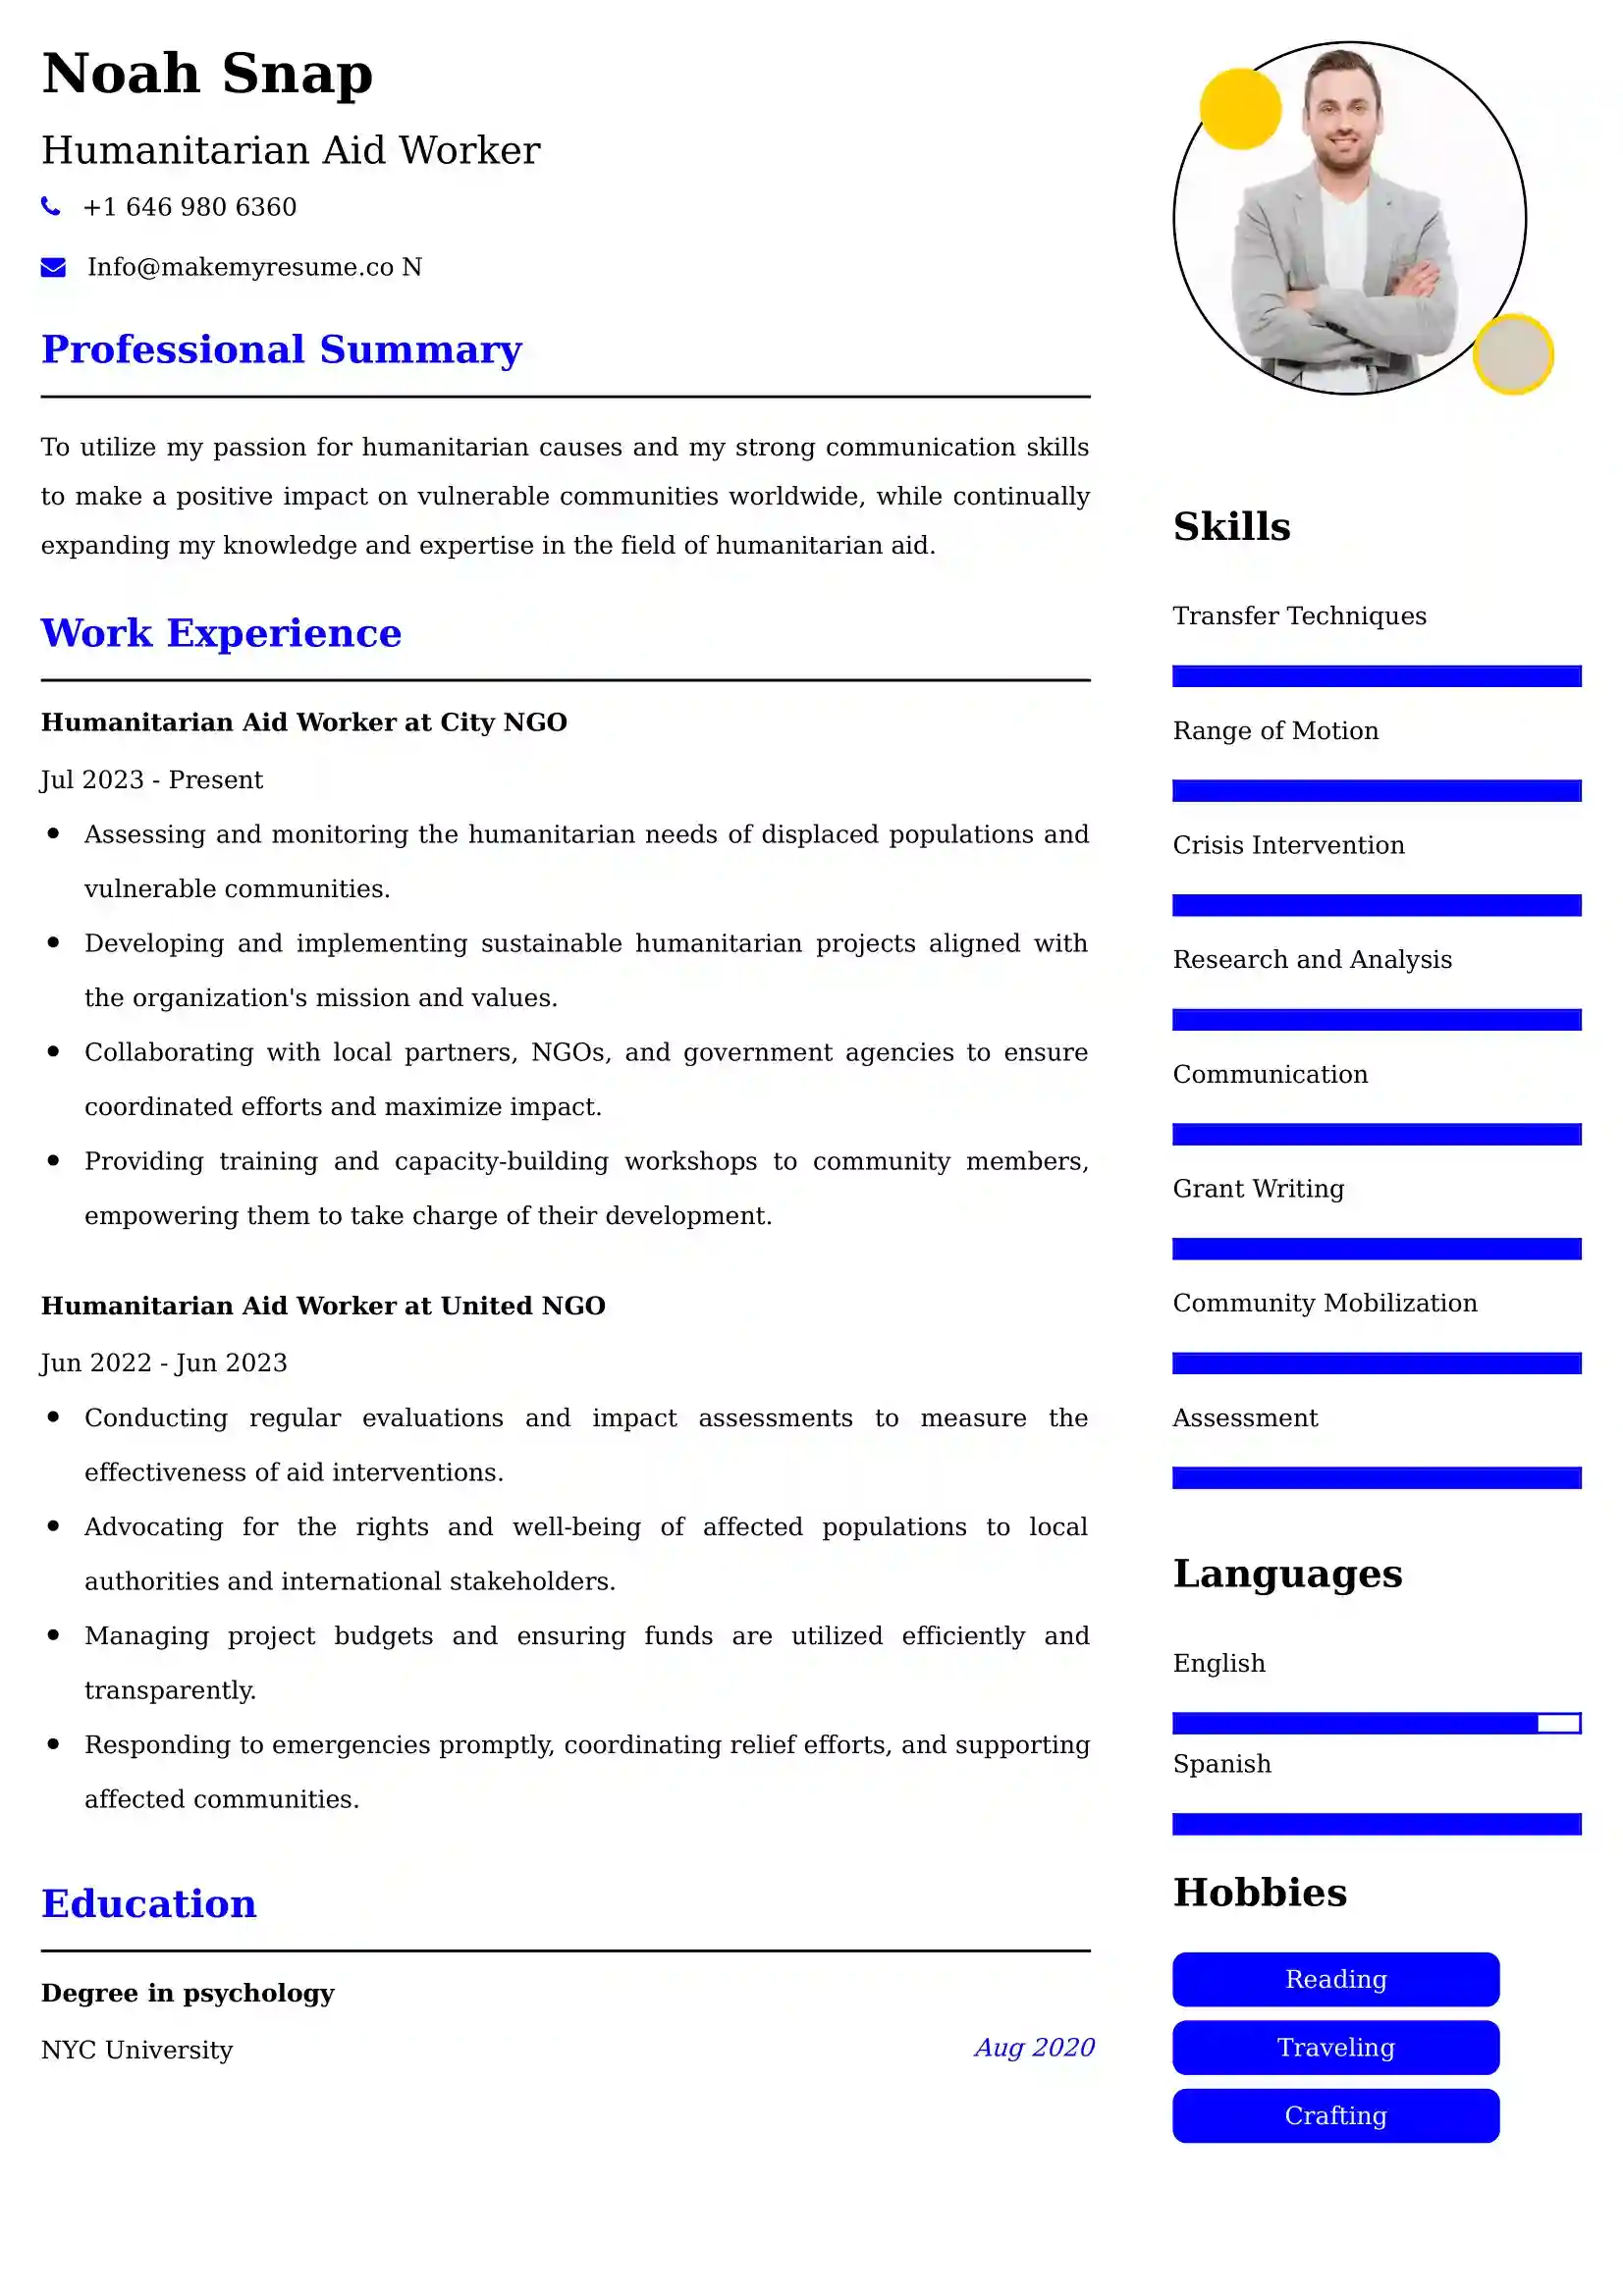 Humanitarian Aid Worker Resume Examples for UK Jobs - Tips and Guide